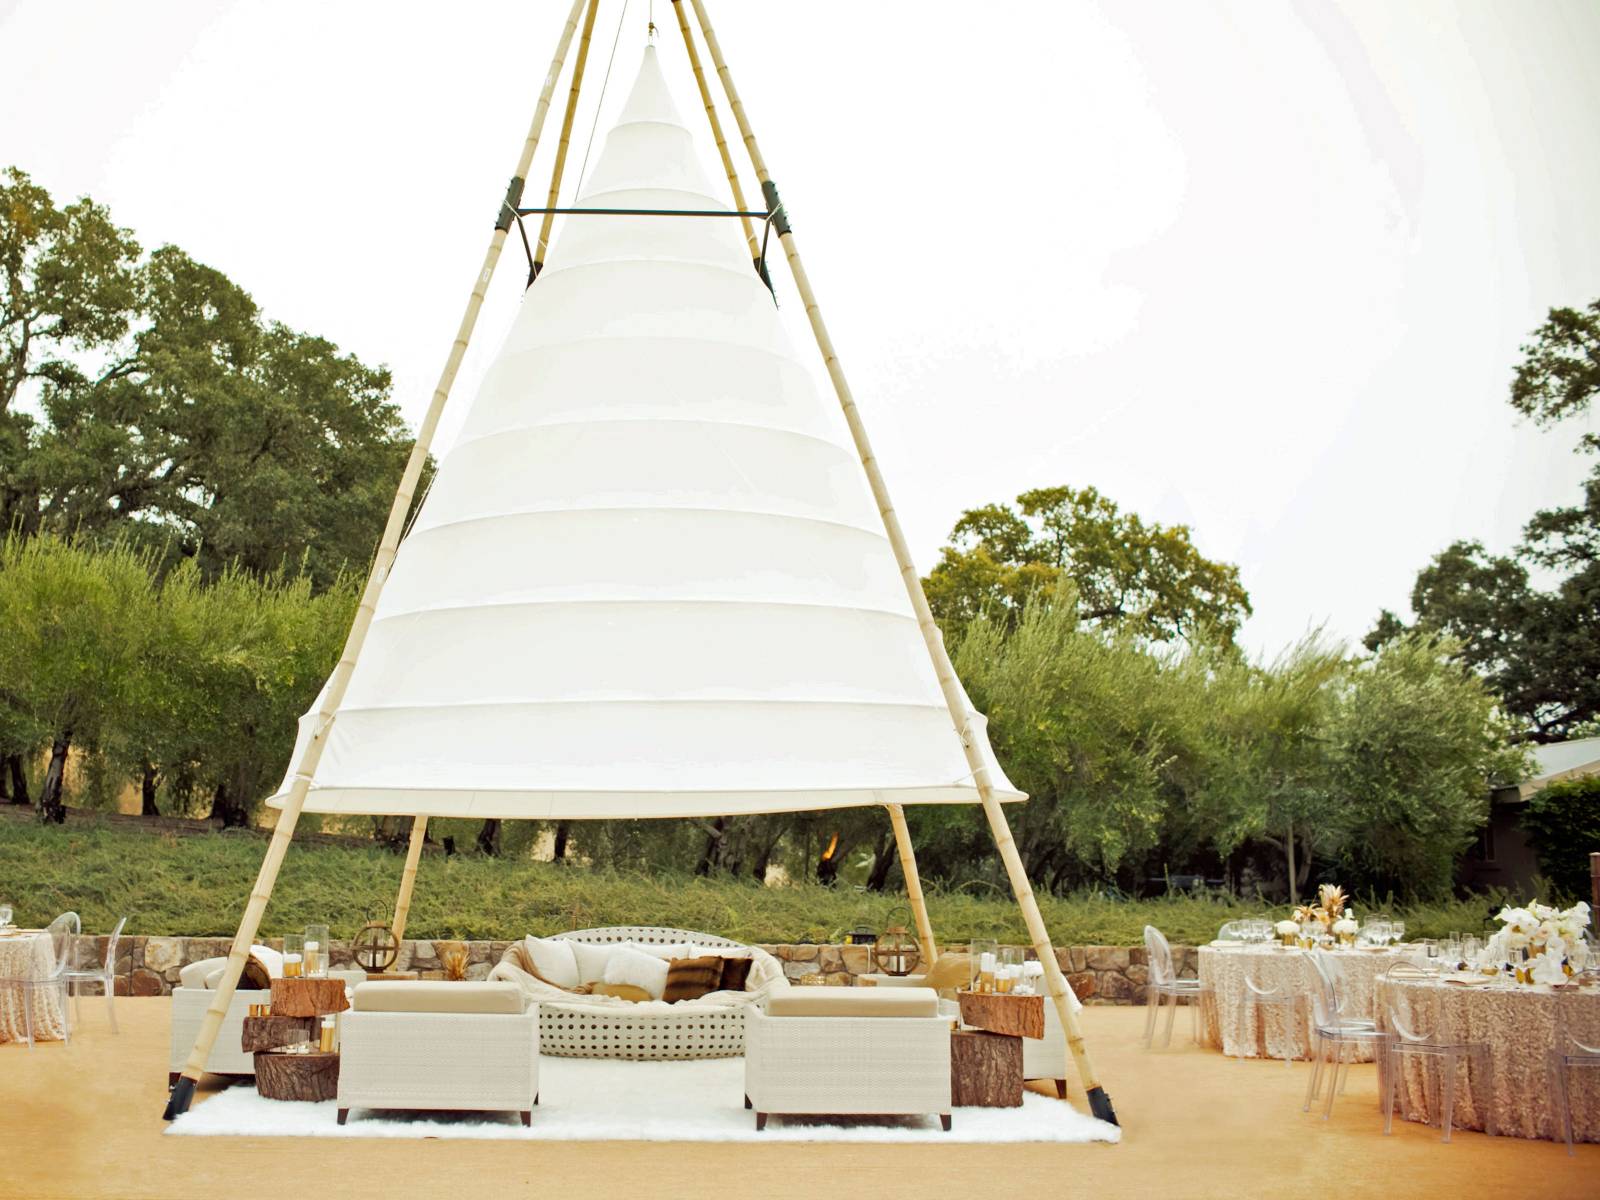 Lounge furniture under a giant white canvas Tepee